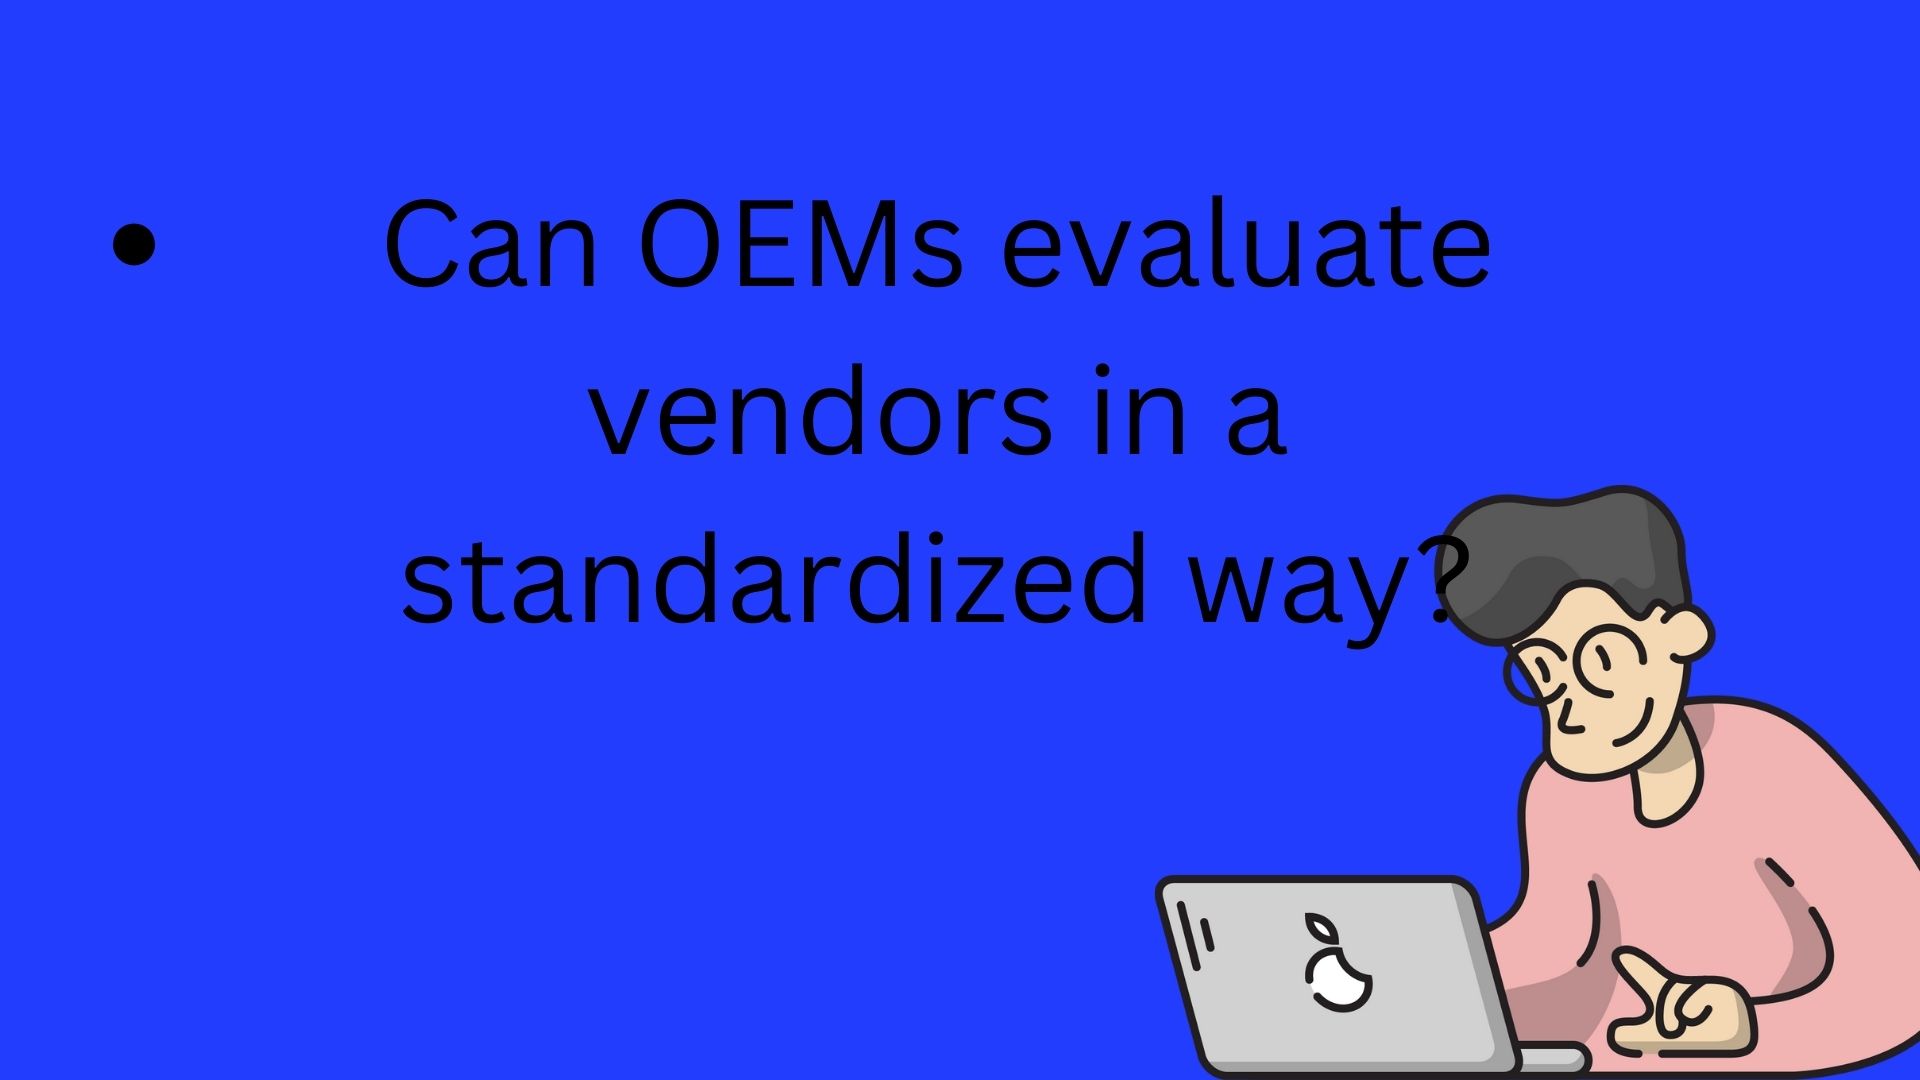 Can OEMs evaluate vendors in a standardized way